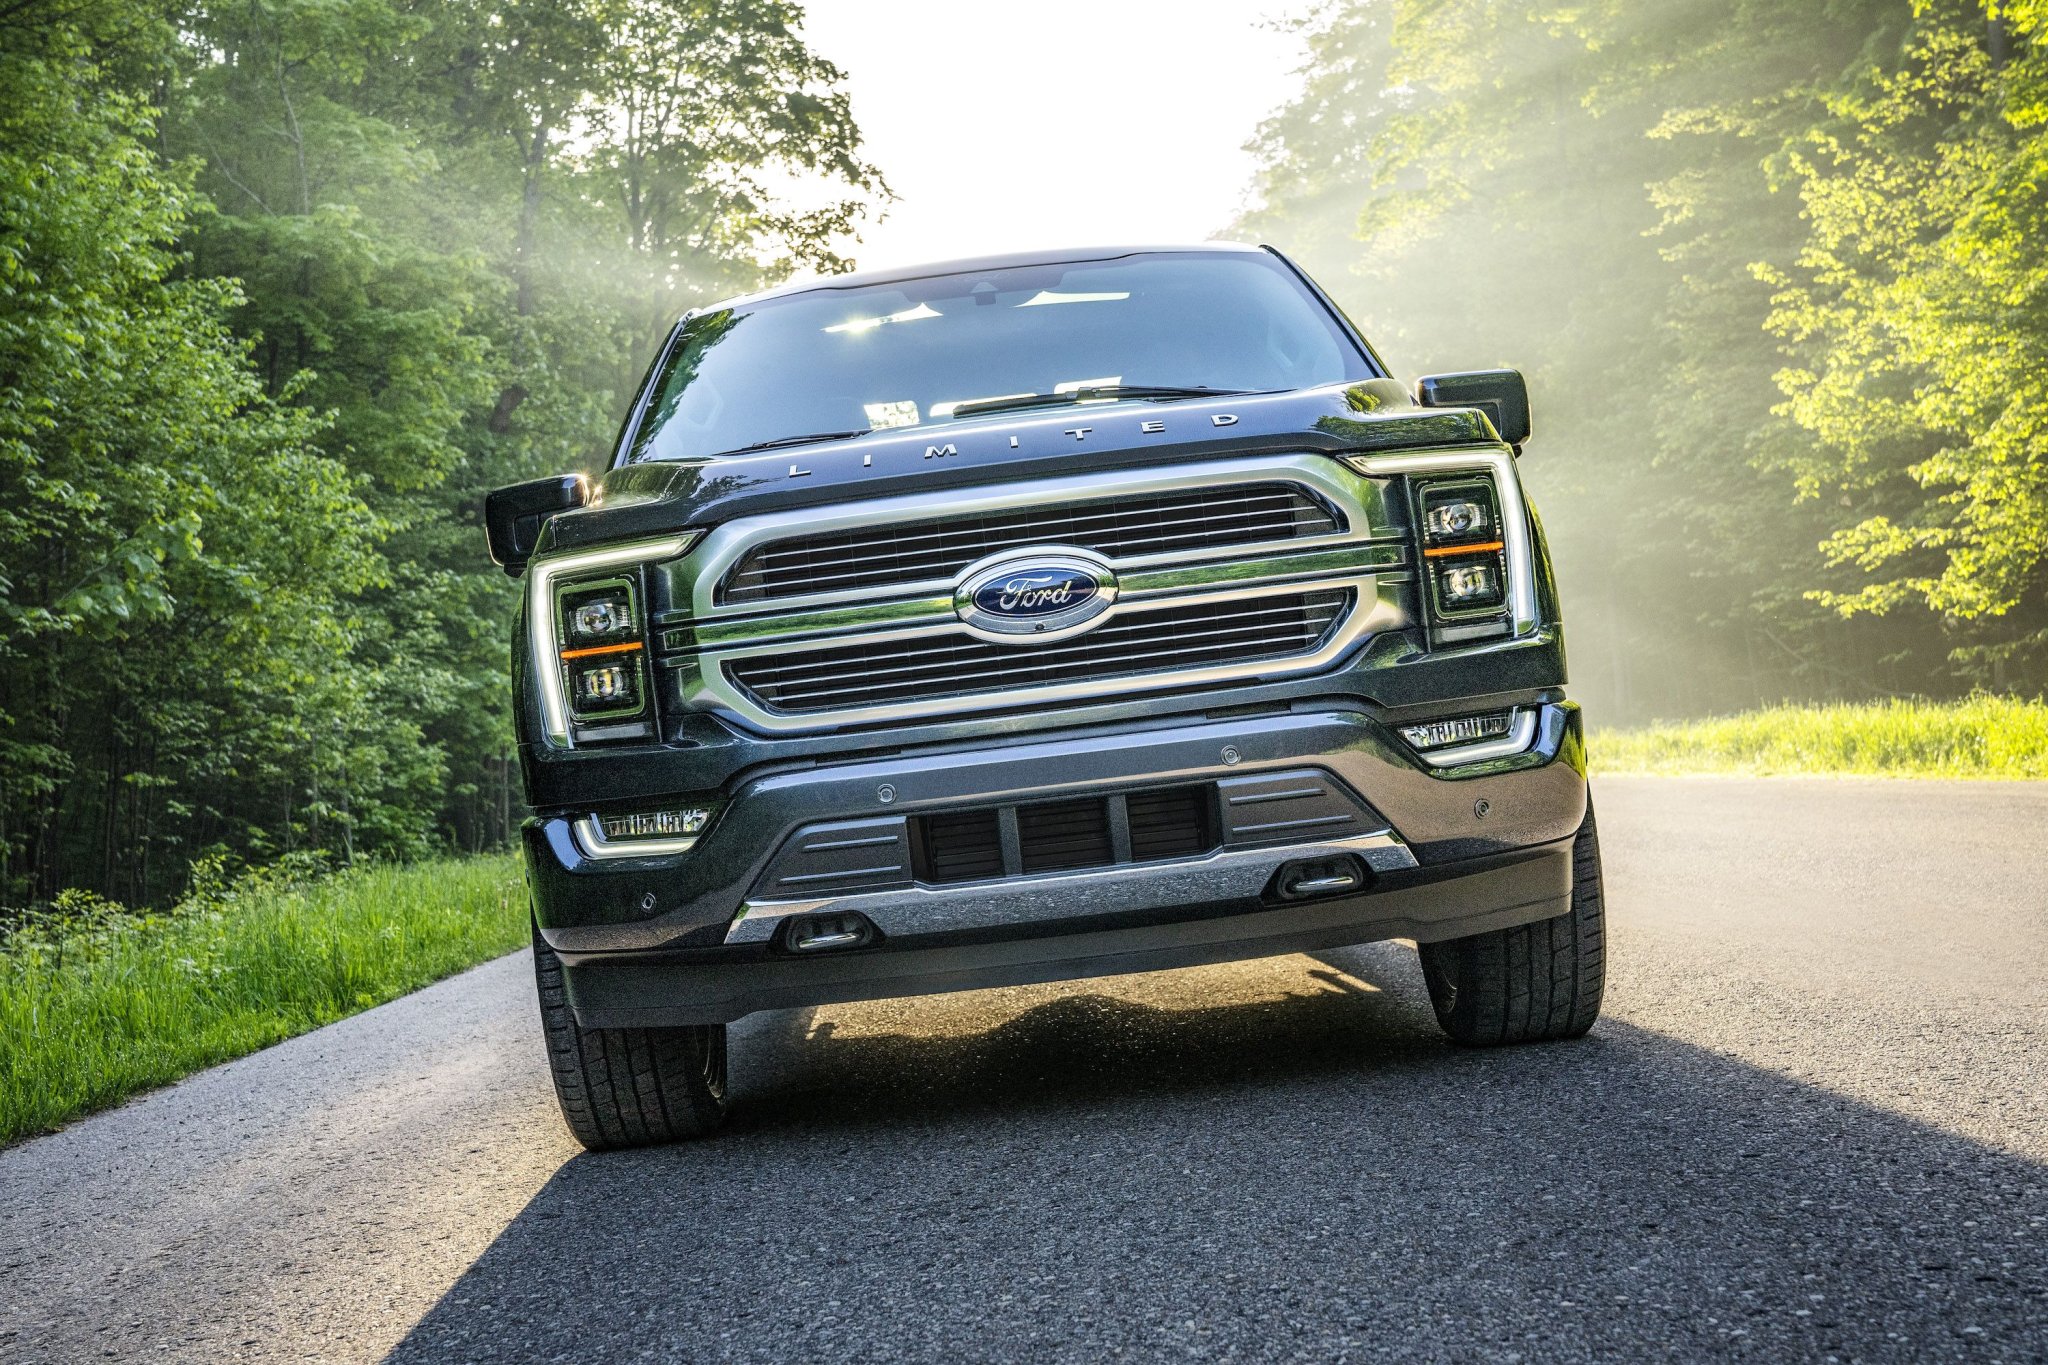 Trucks Have Gotten Enormous. But That’s Not Entirely a Bad Thing